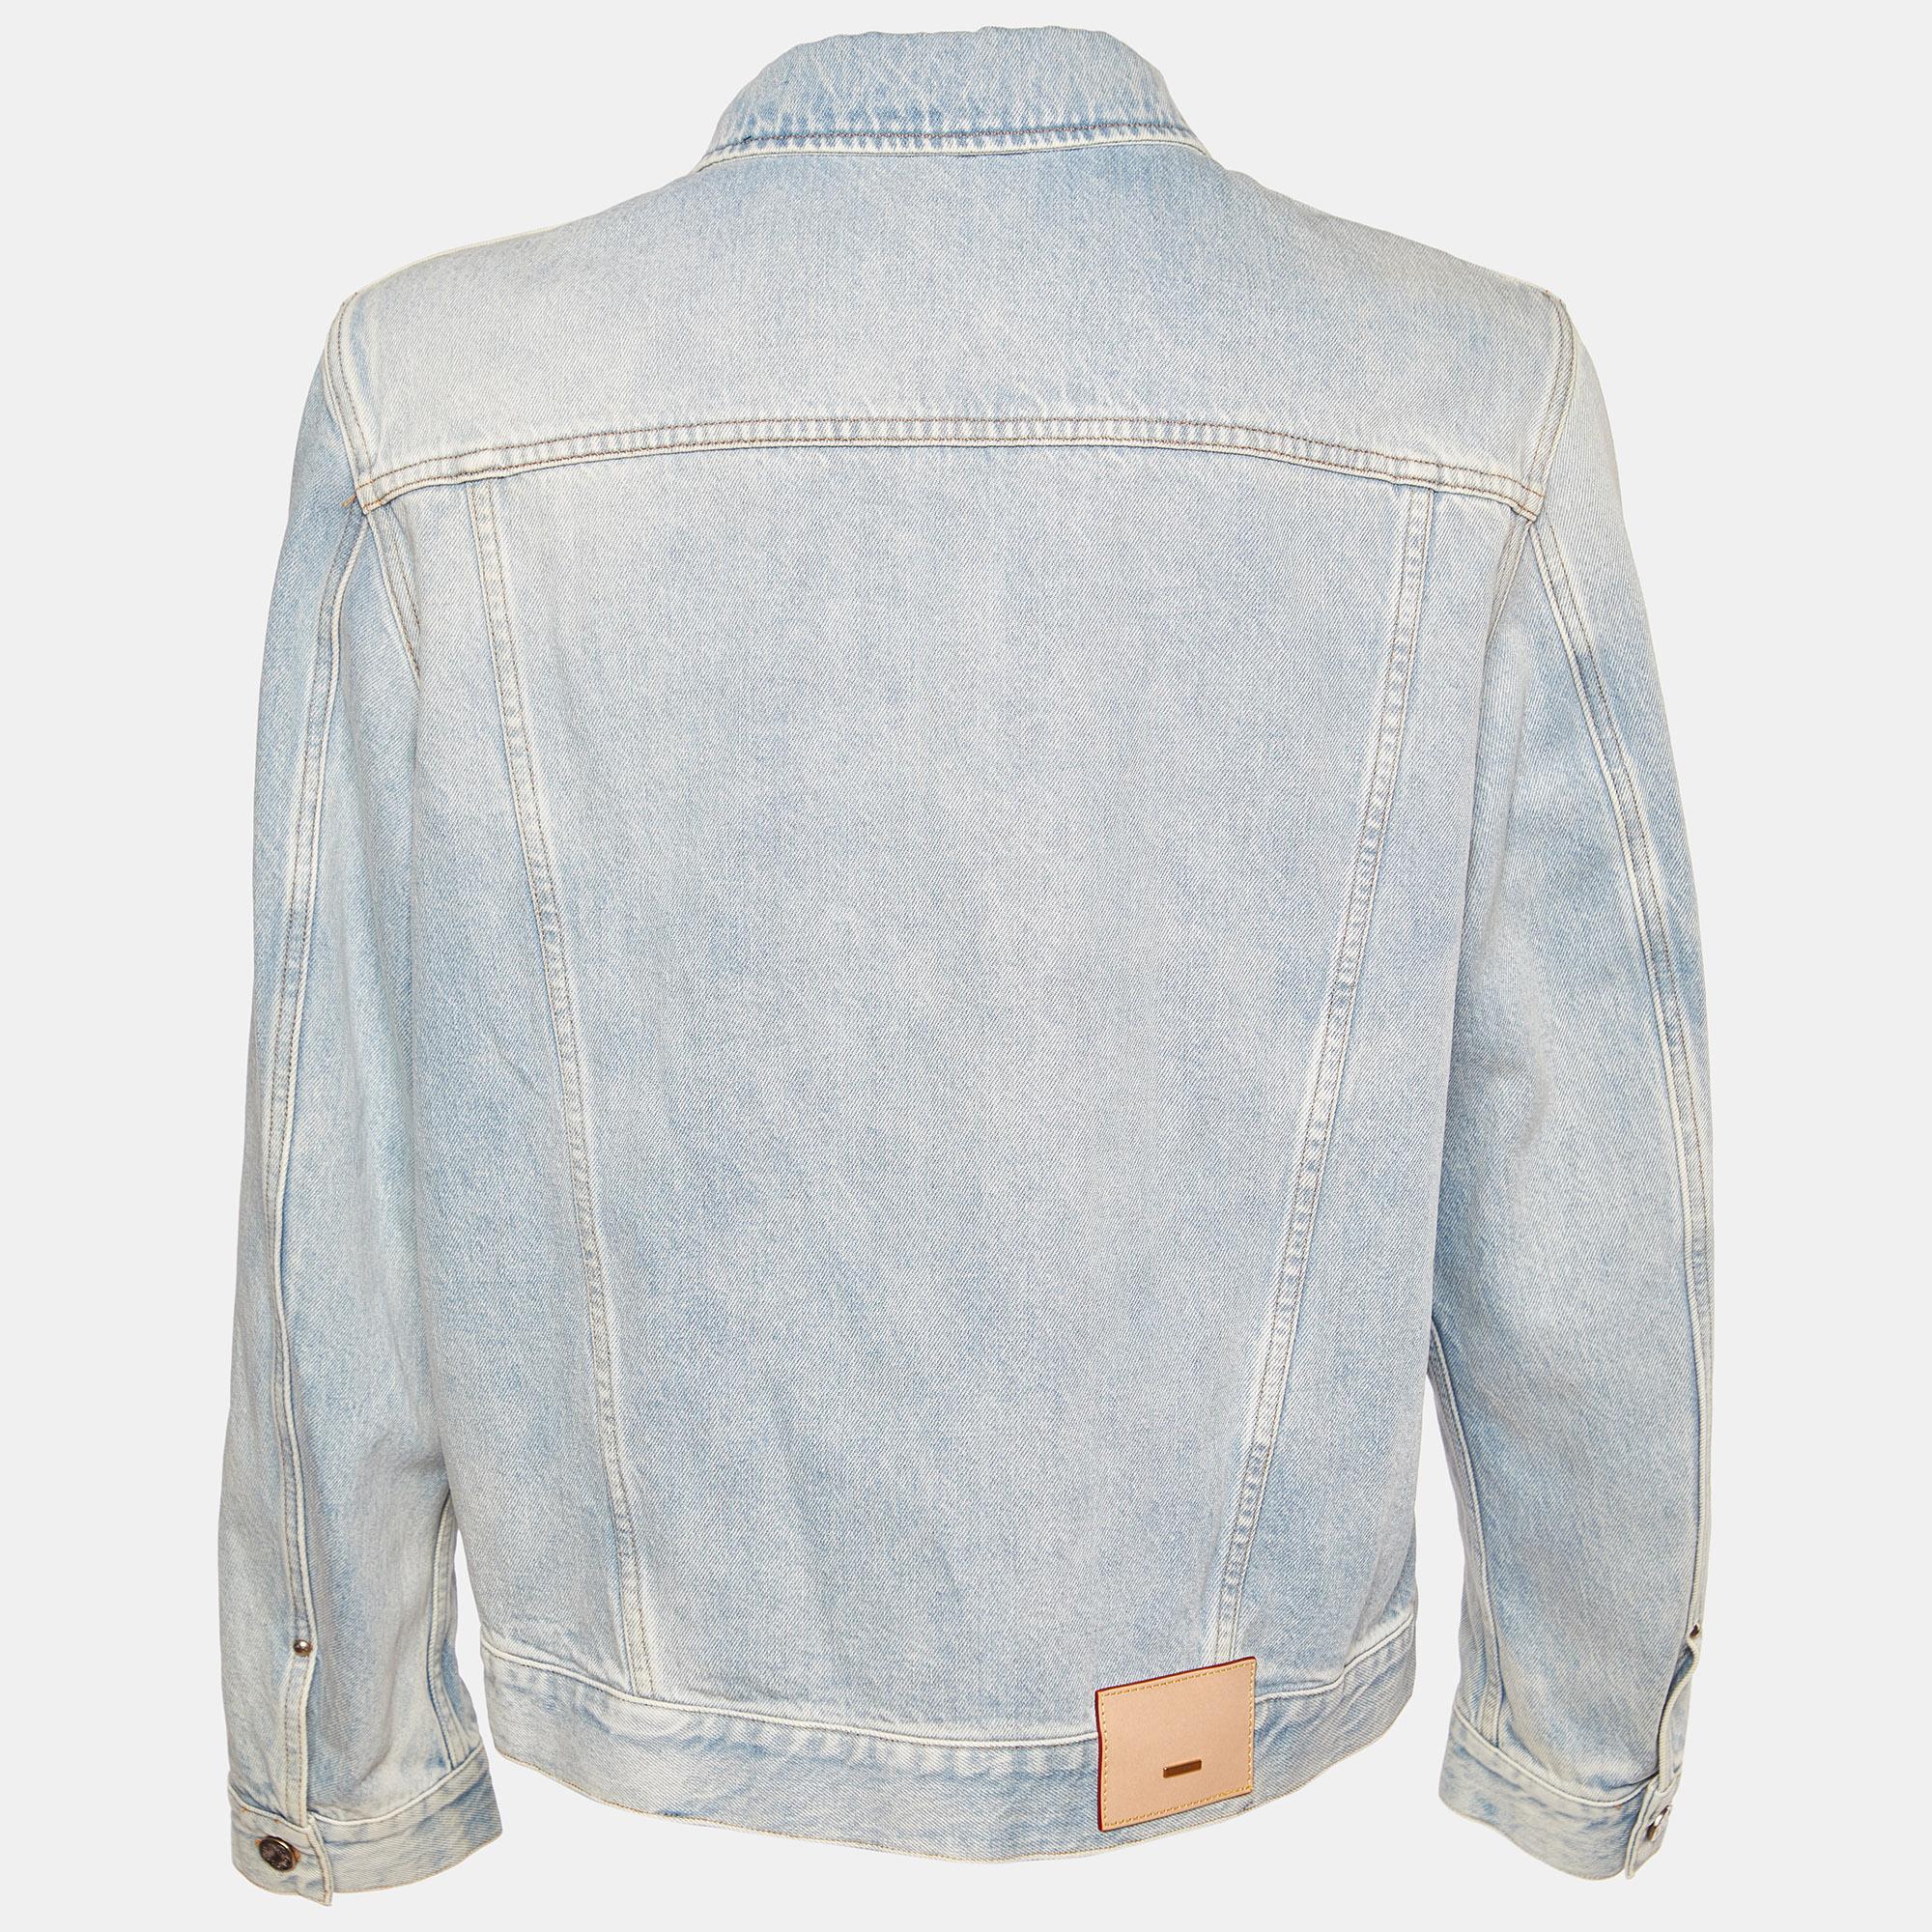 The Louis Vuitton denim jacket exudes casual luxury with its premium denim construction. Featuring a timeless button-front design, the jacket combines classic style with modern sophistication. The distinctive blue-washed finish adds a touch of